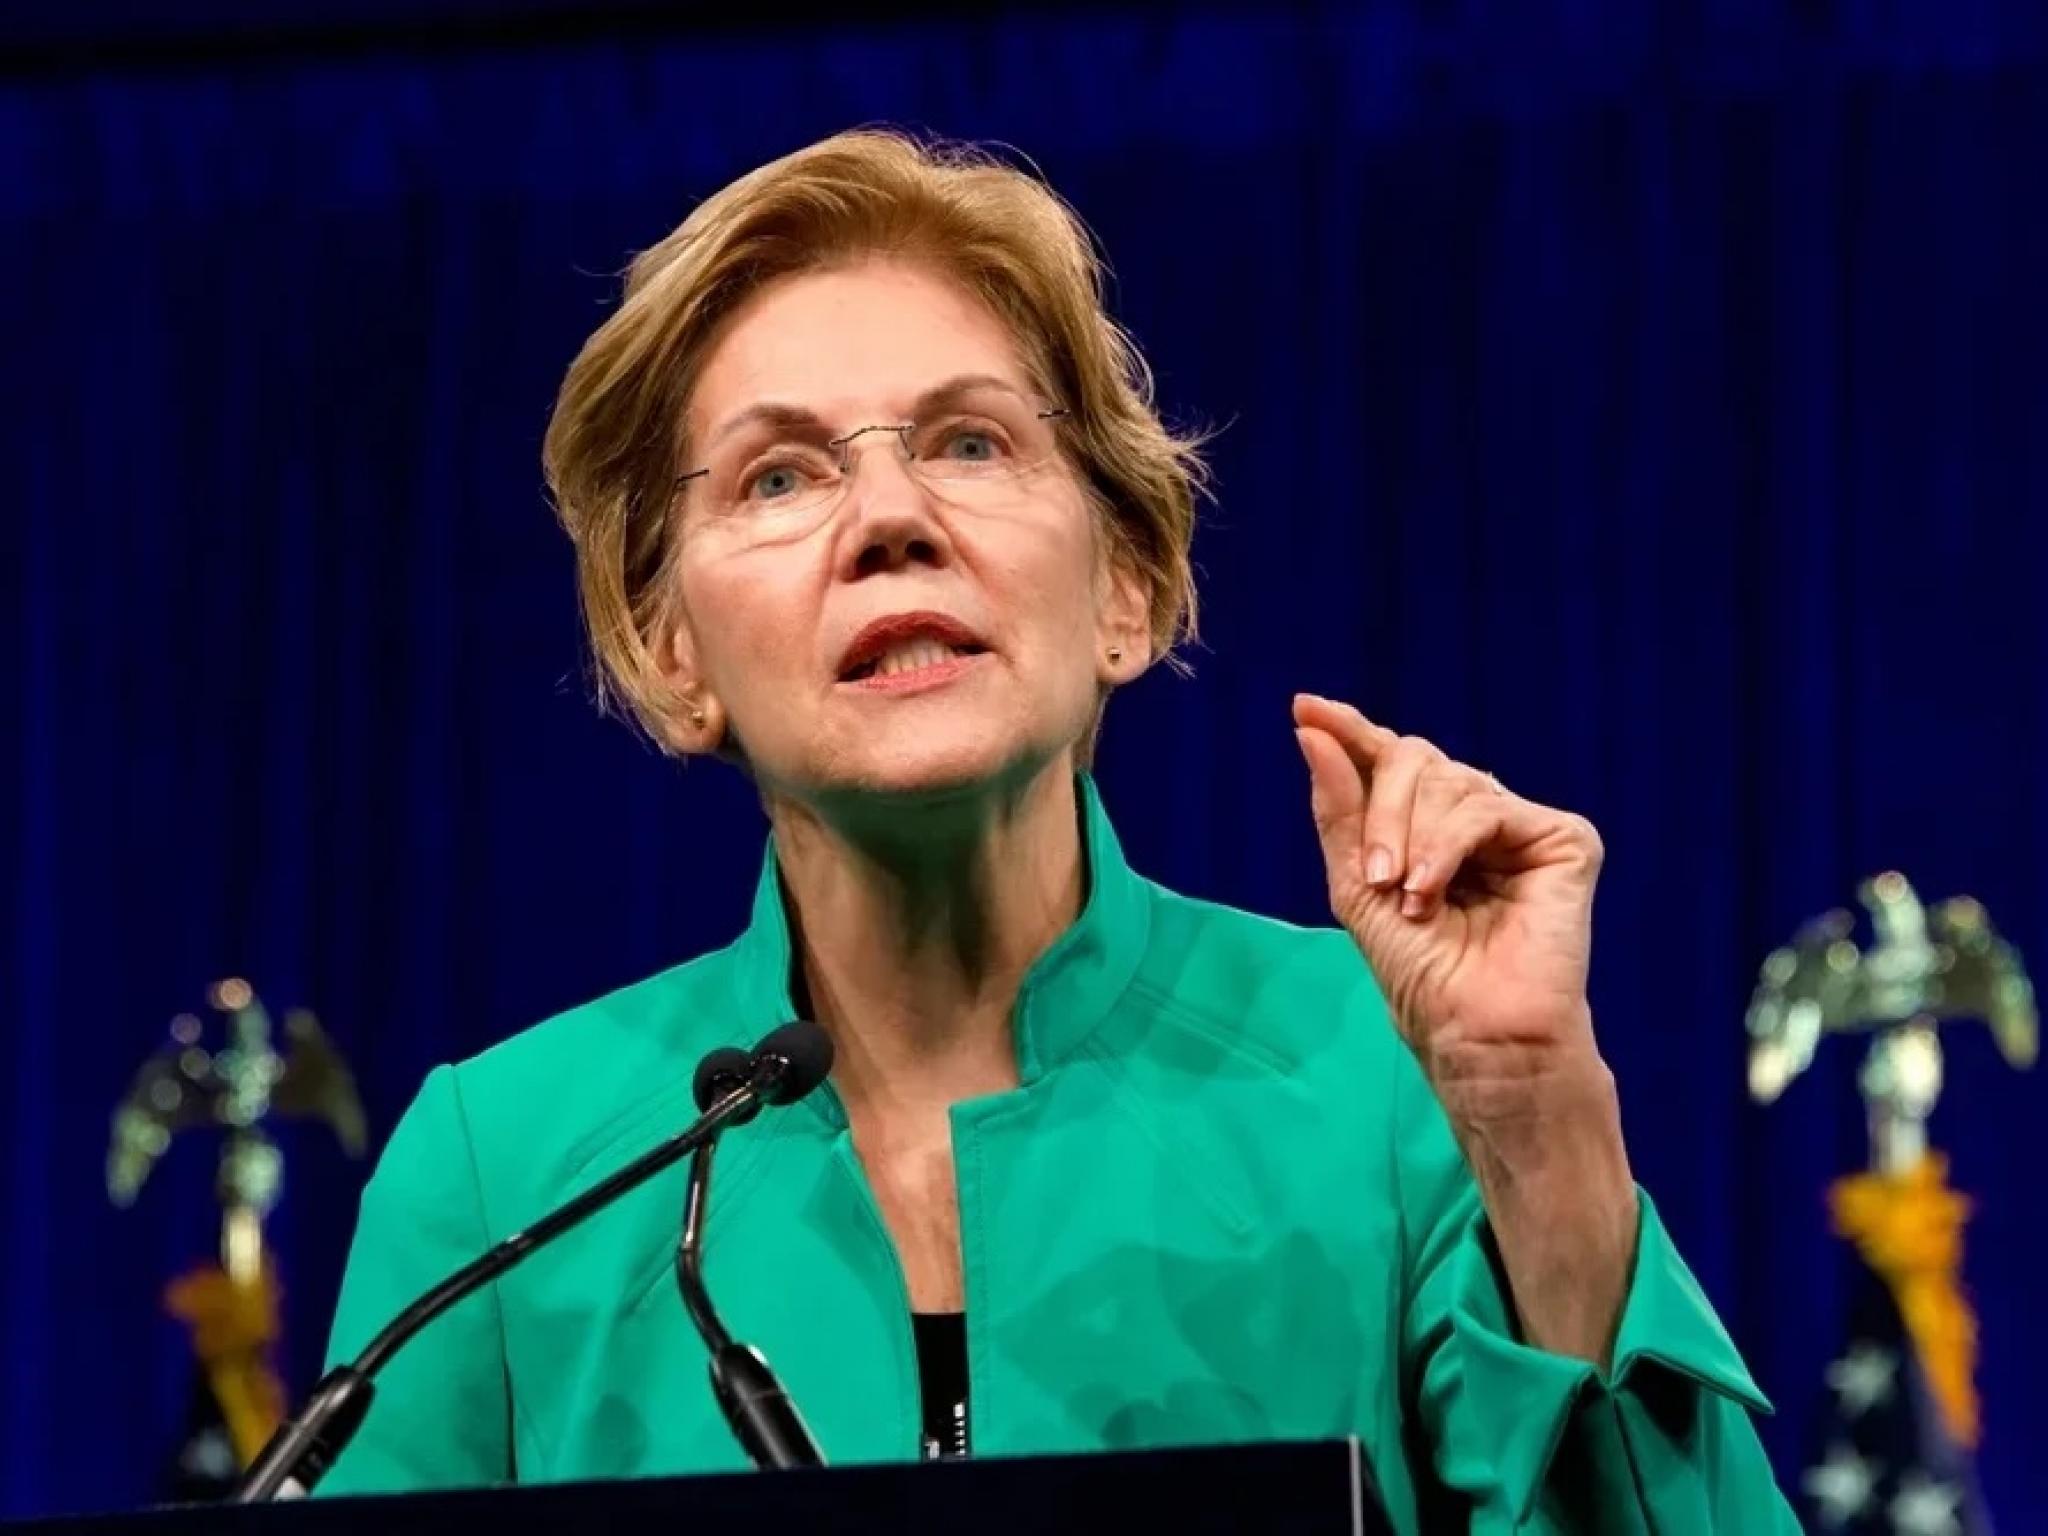  elizabeth-warren-and-jonathan-van-ness-prevent-corporations-like-amazon-booze-and-tobacco-from-taking-over-cannabis-industry 